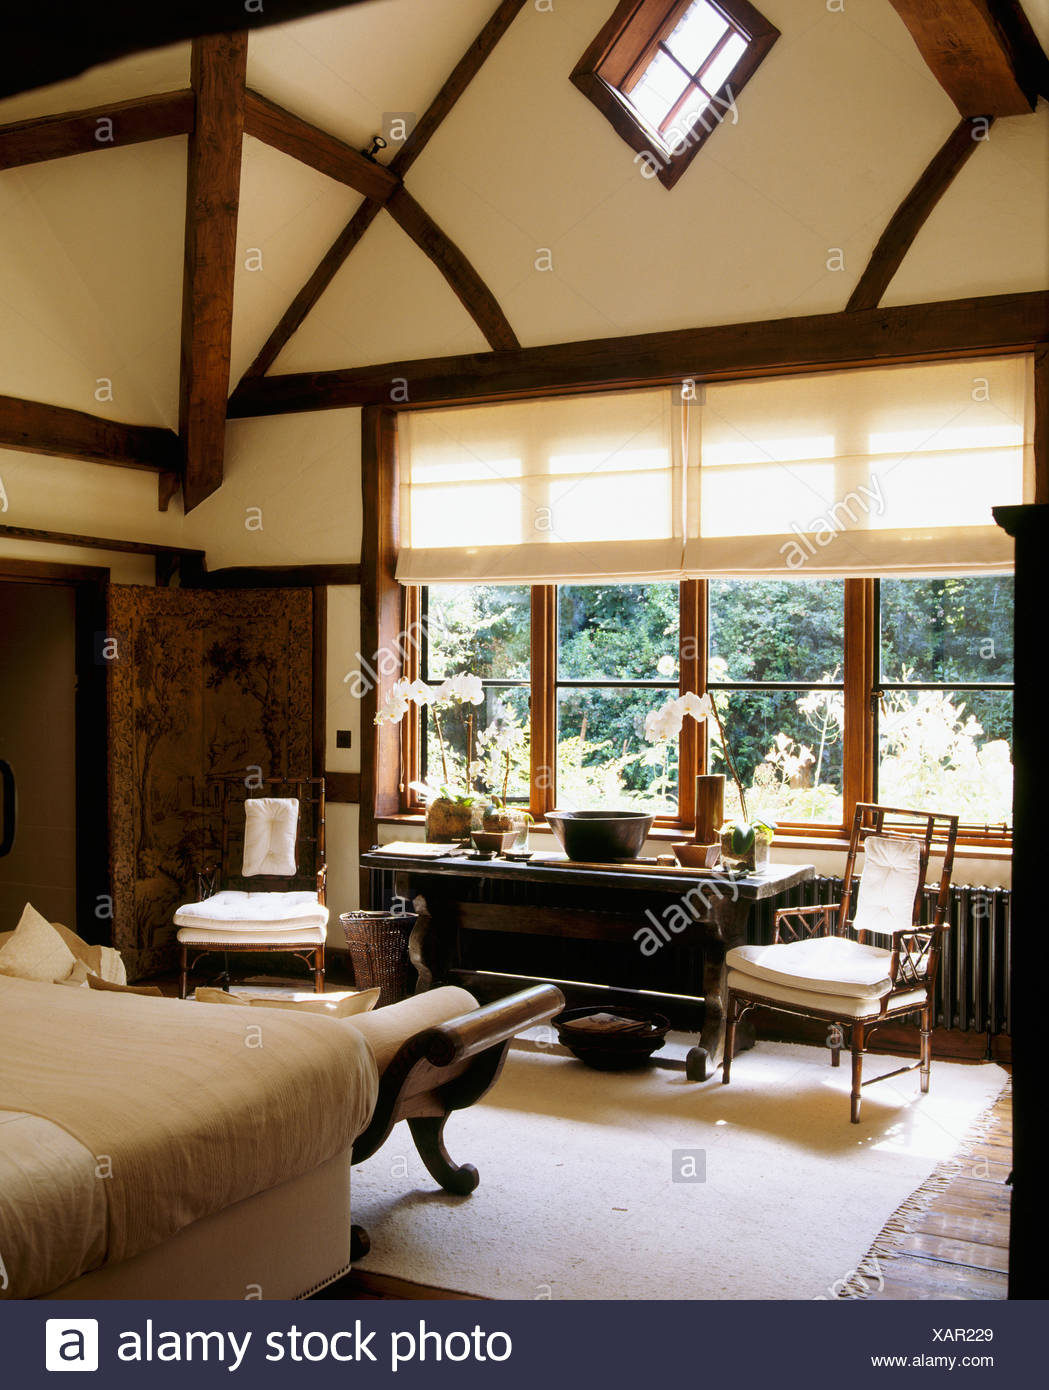 Tudor Style Beams And High Vaulted Ceiling In Country Bedroom With